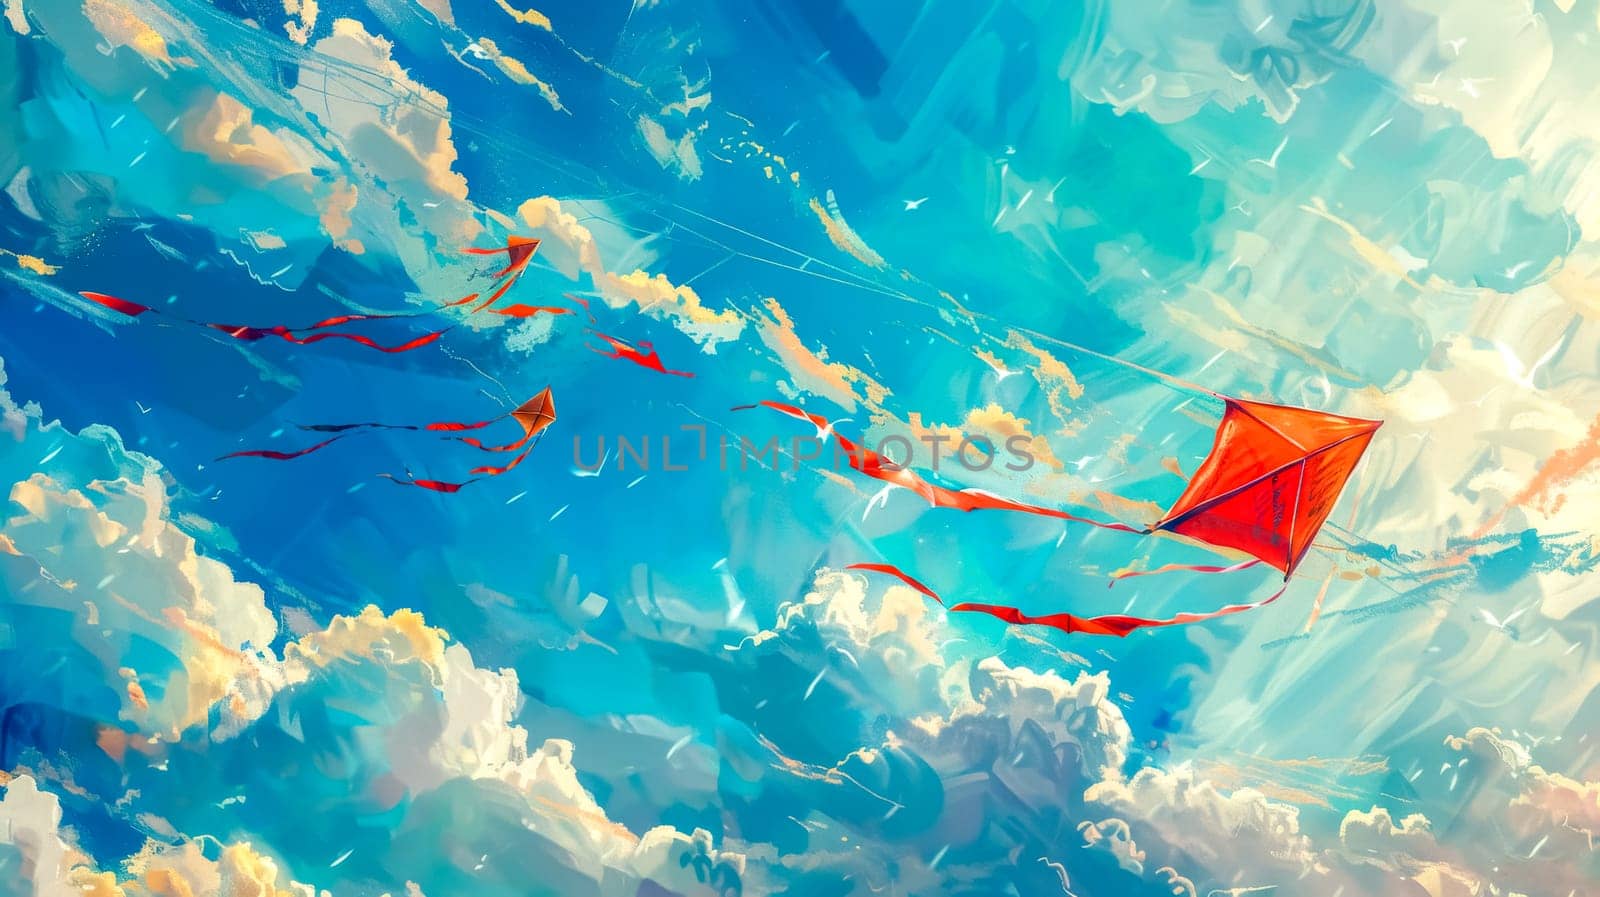 Whimsical digital painting of red kites soaring amidst fluffy clouds on a sunny day